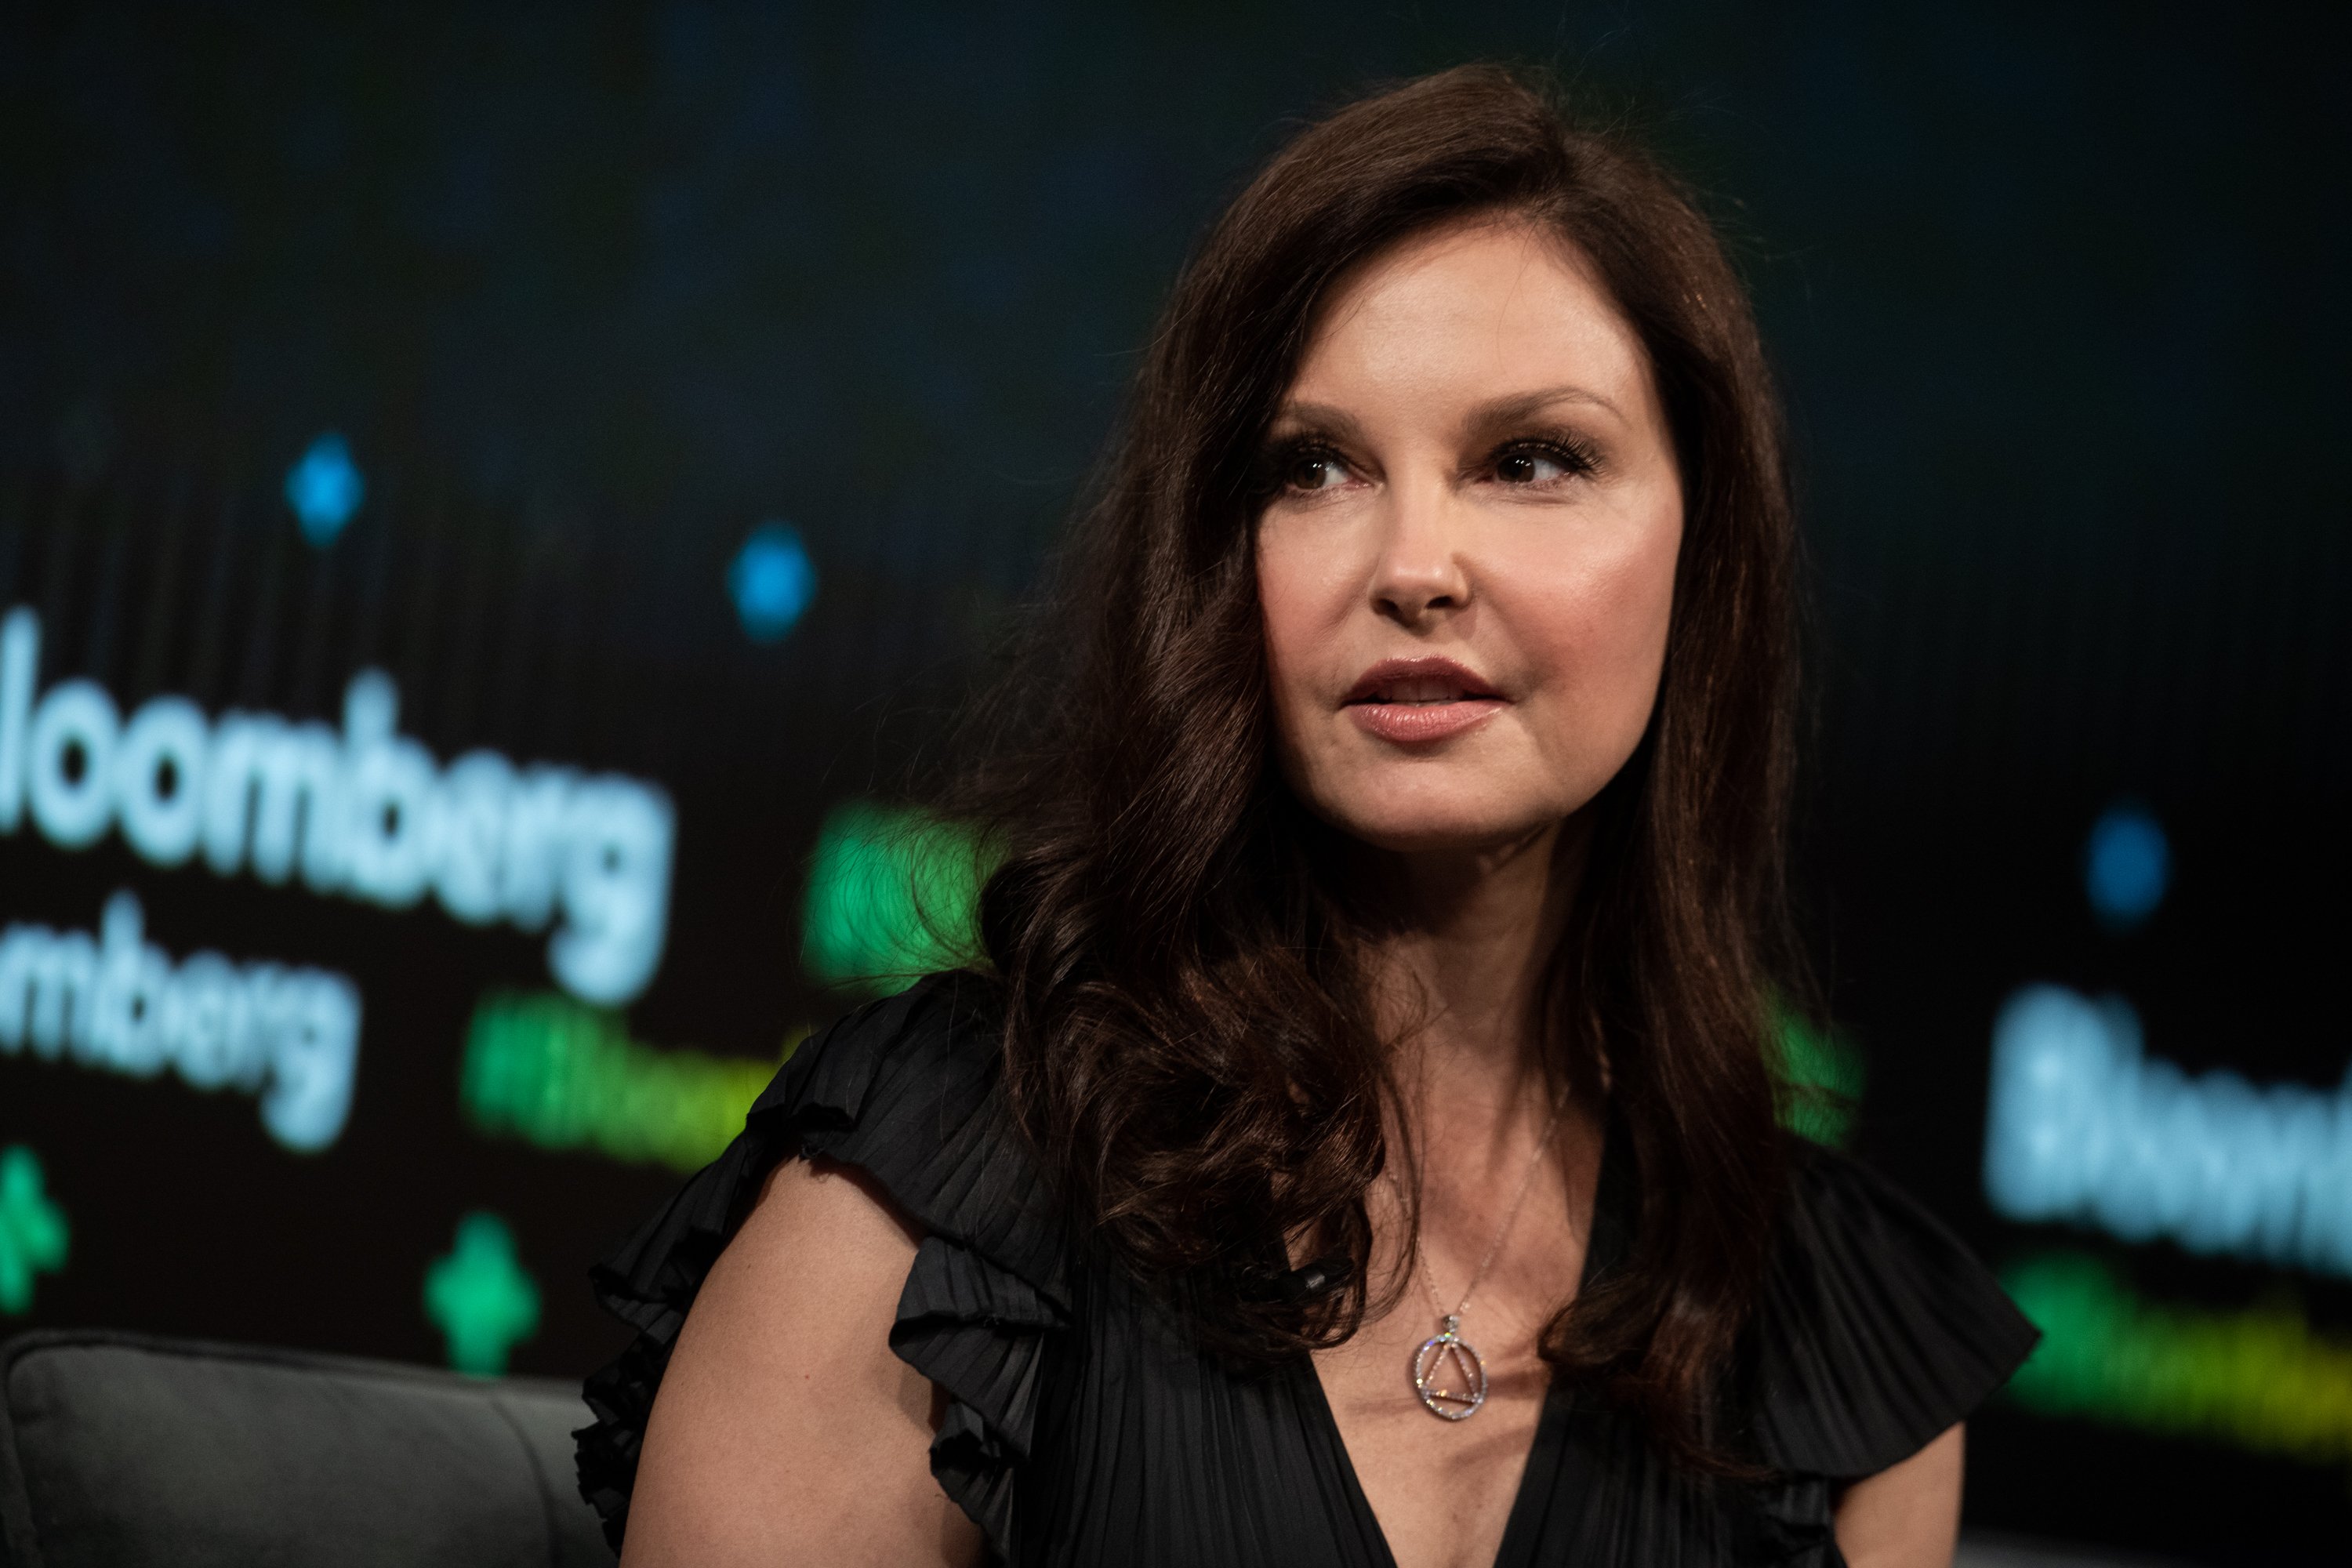 Actress Ashley Judd during the Bloomberg Business of Equality conference in New York on May 8 2018 | Source: Getty Images